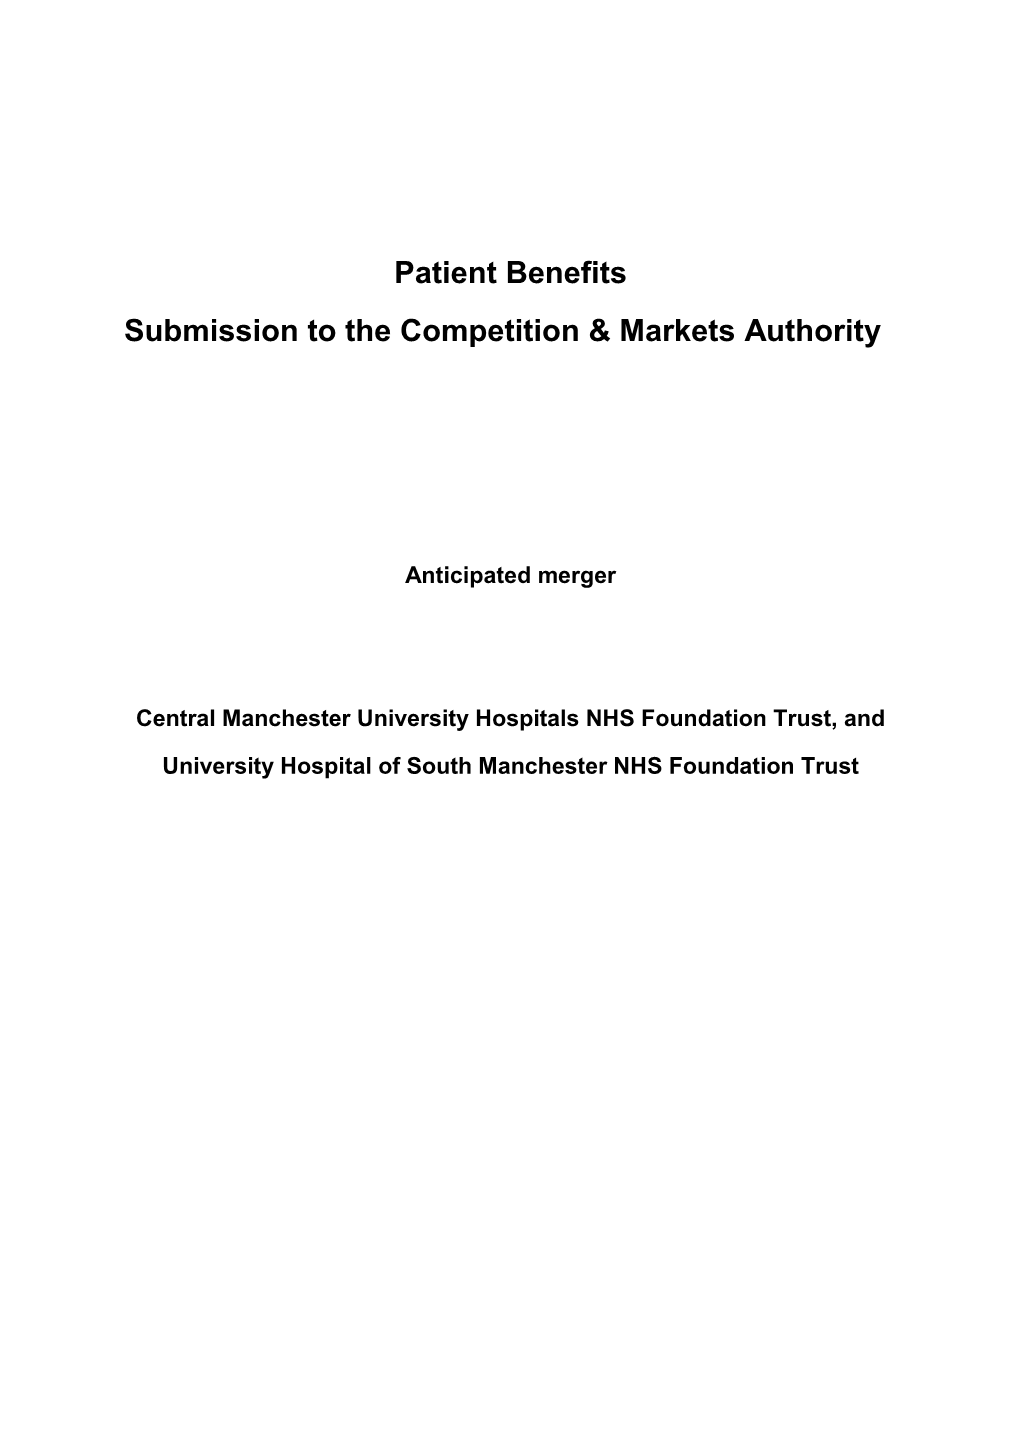 Patient Benefits Submission to the Competition & Markets Authority